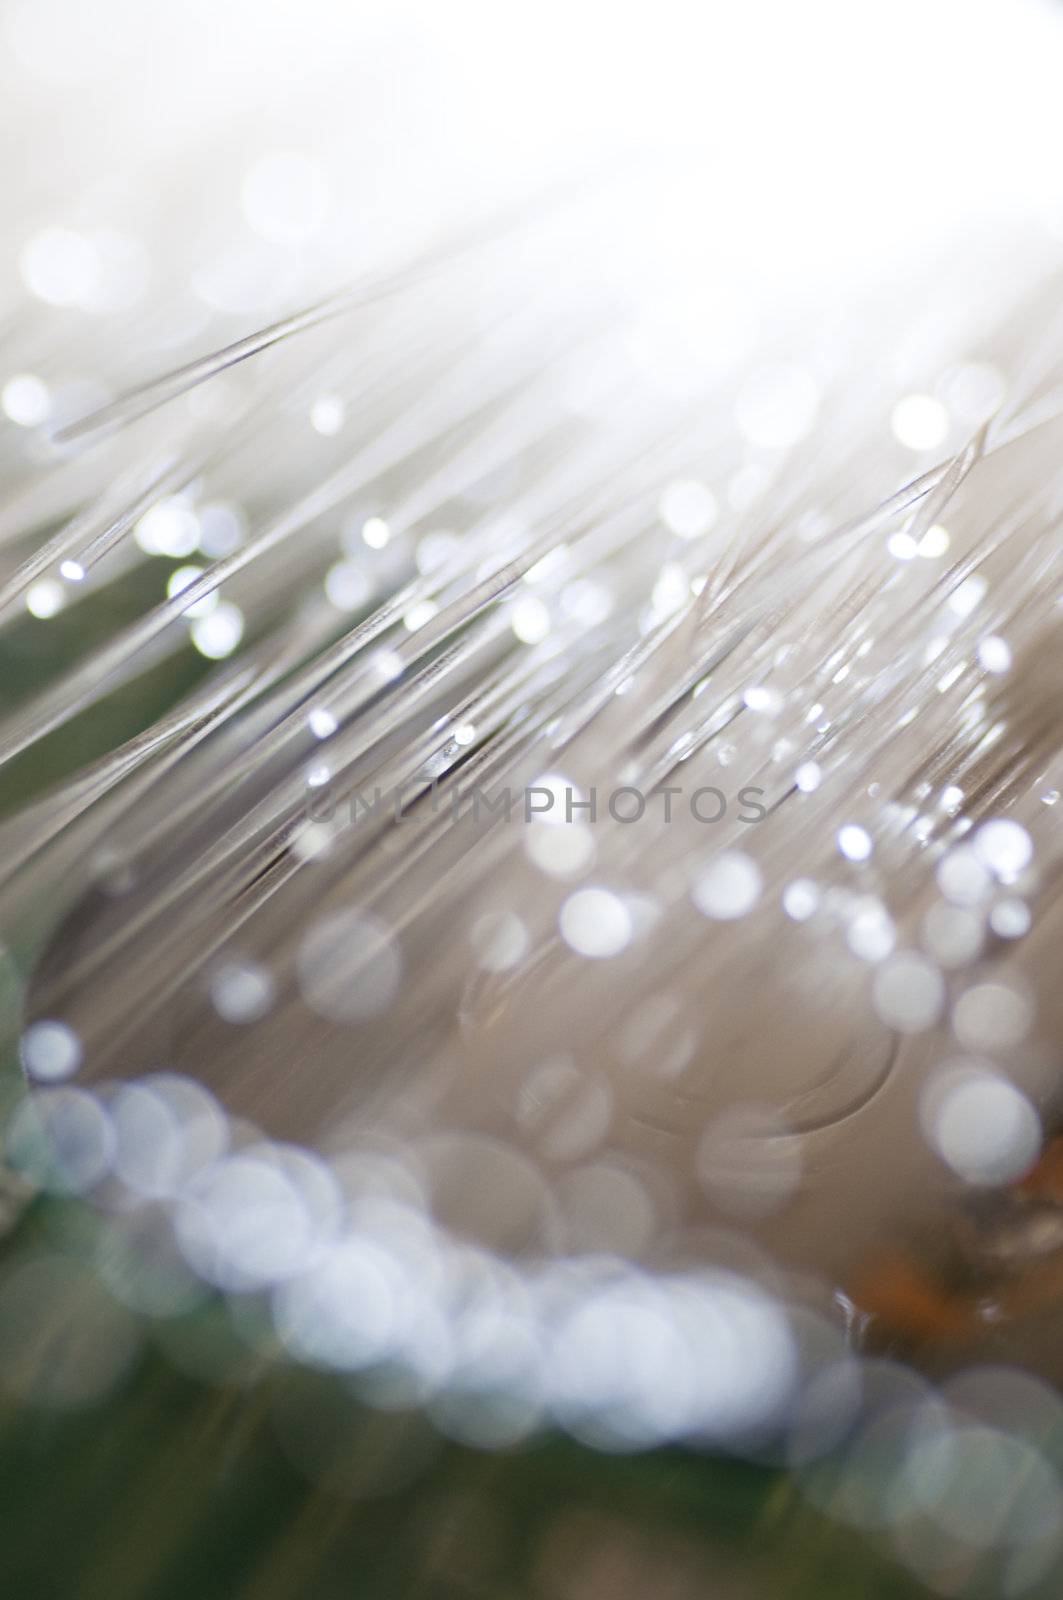 Optical fiber picture with details and light effects. by FernandoCortes